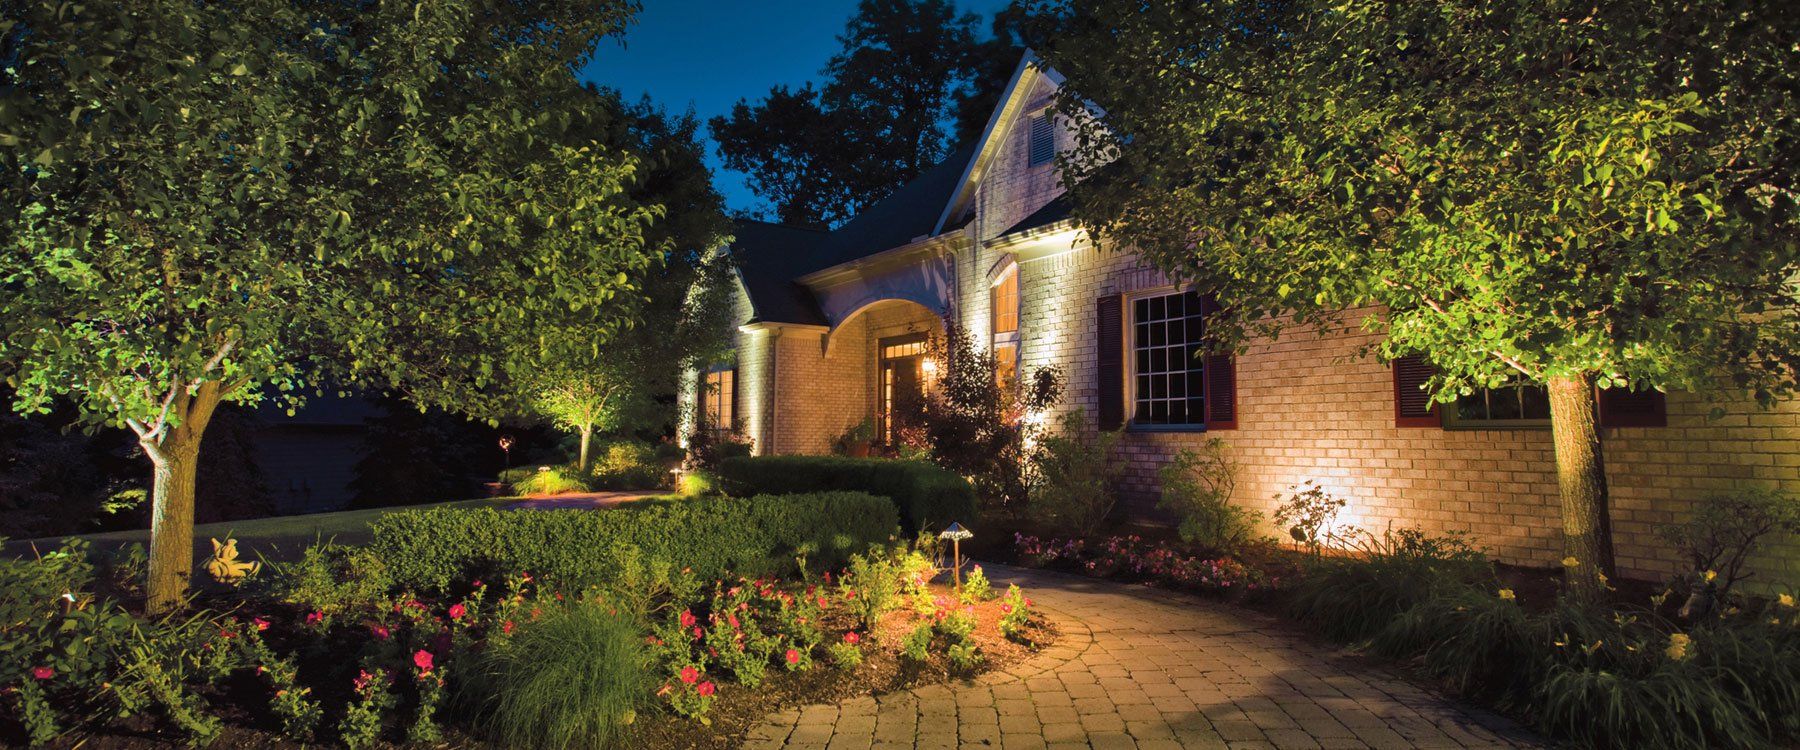 Ohio landscape outdoor lighting design and placement tips